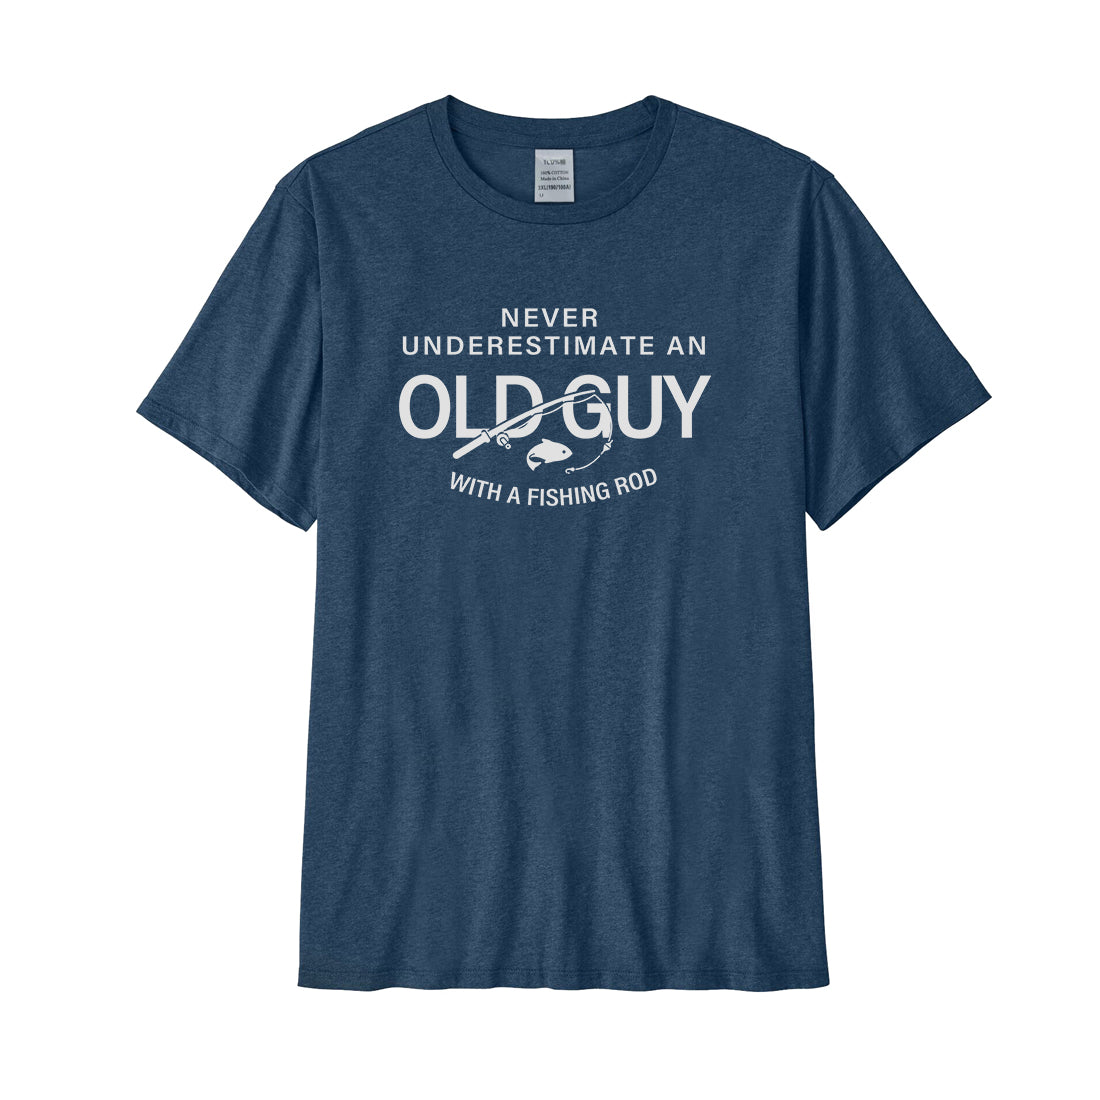 NEVER UNDERESTIMATE AN OLD GUY WITH A FISHING ROD Performance T-Shirt